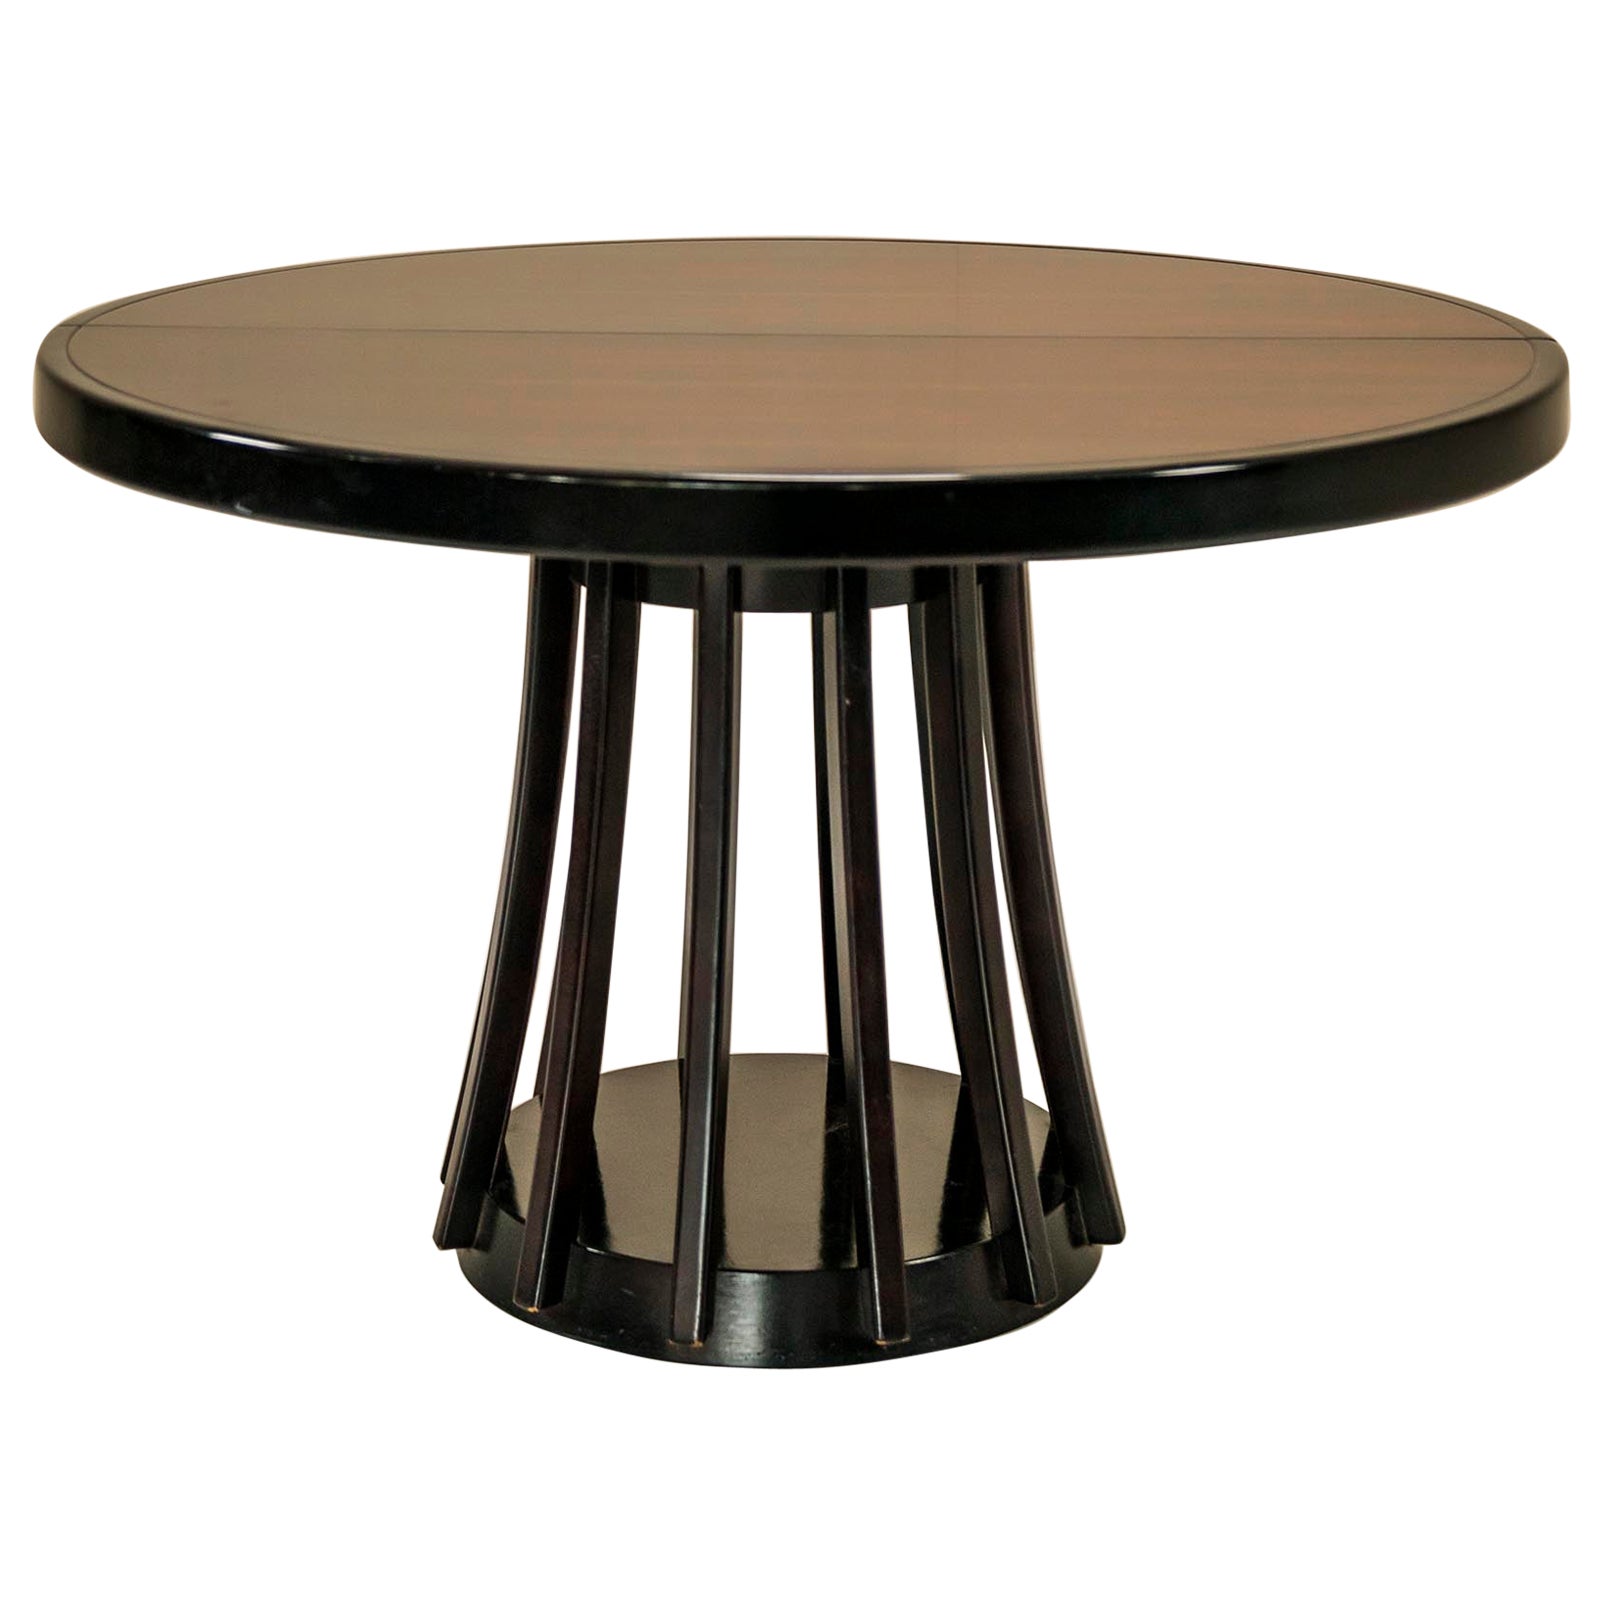 Angelo Mangiarotti 'S11' Round Dining Table in Ebony, Italy, 1970s For Sale